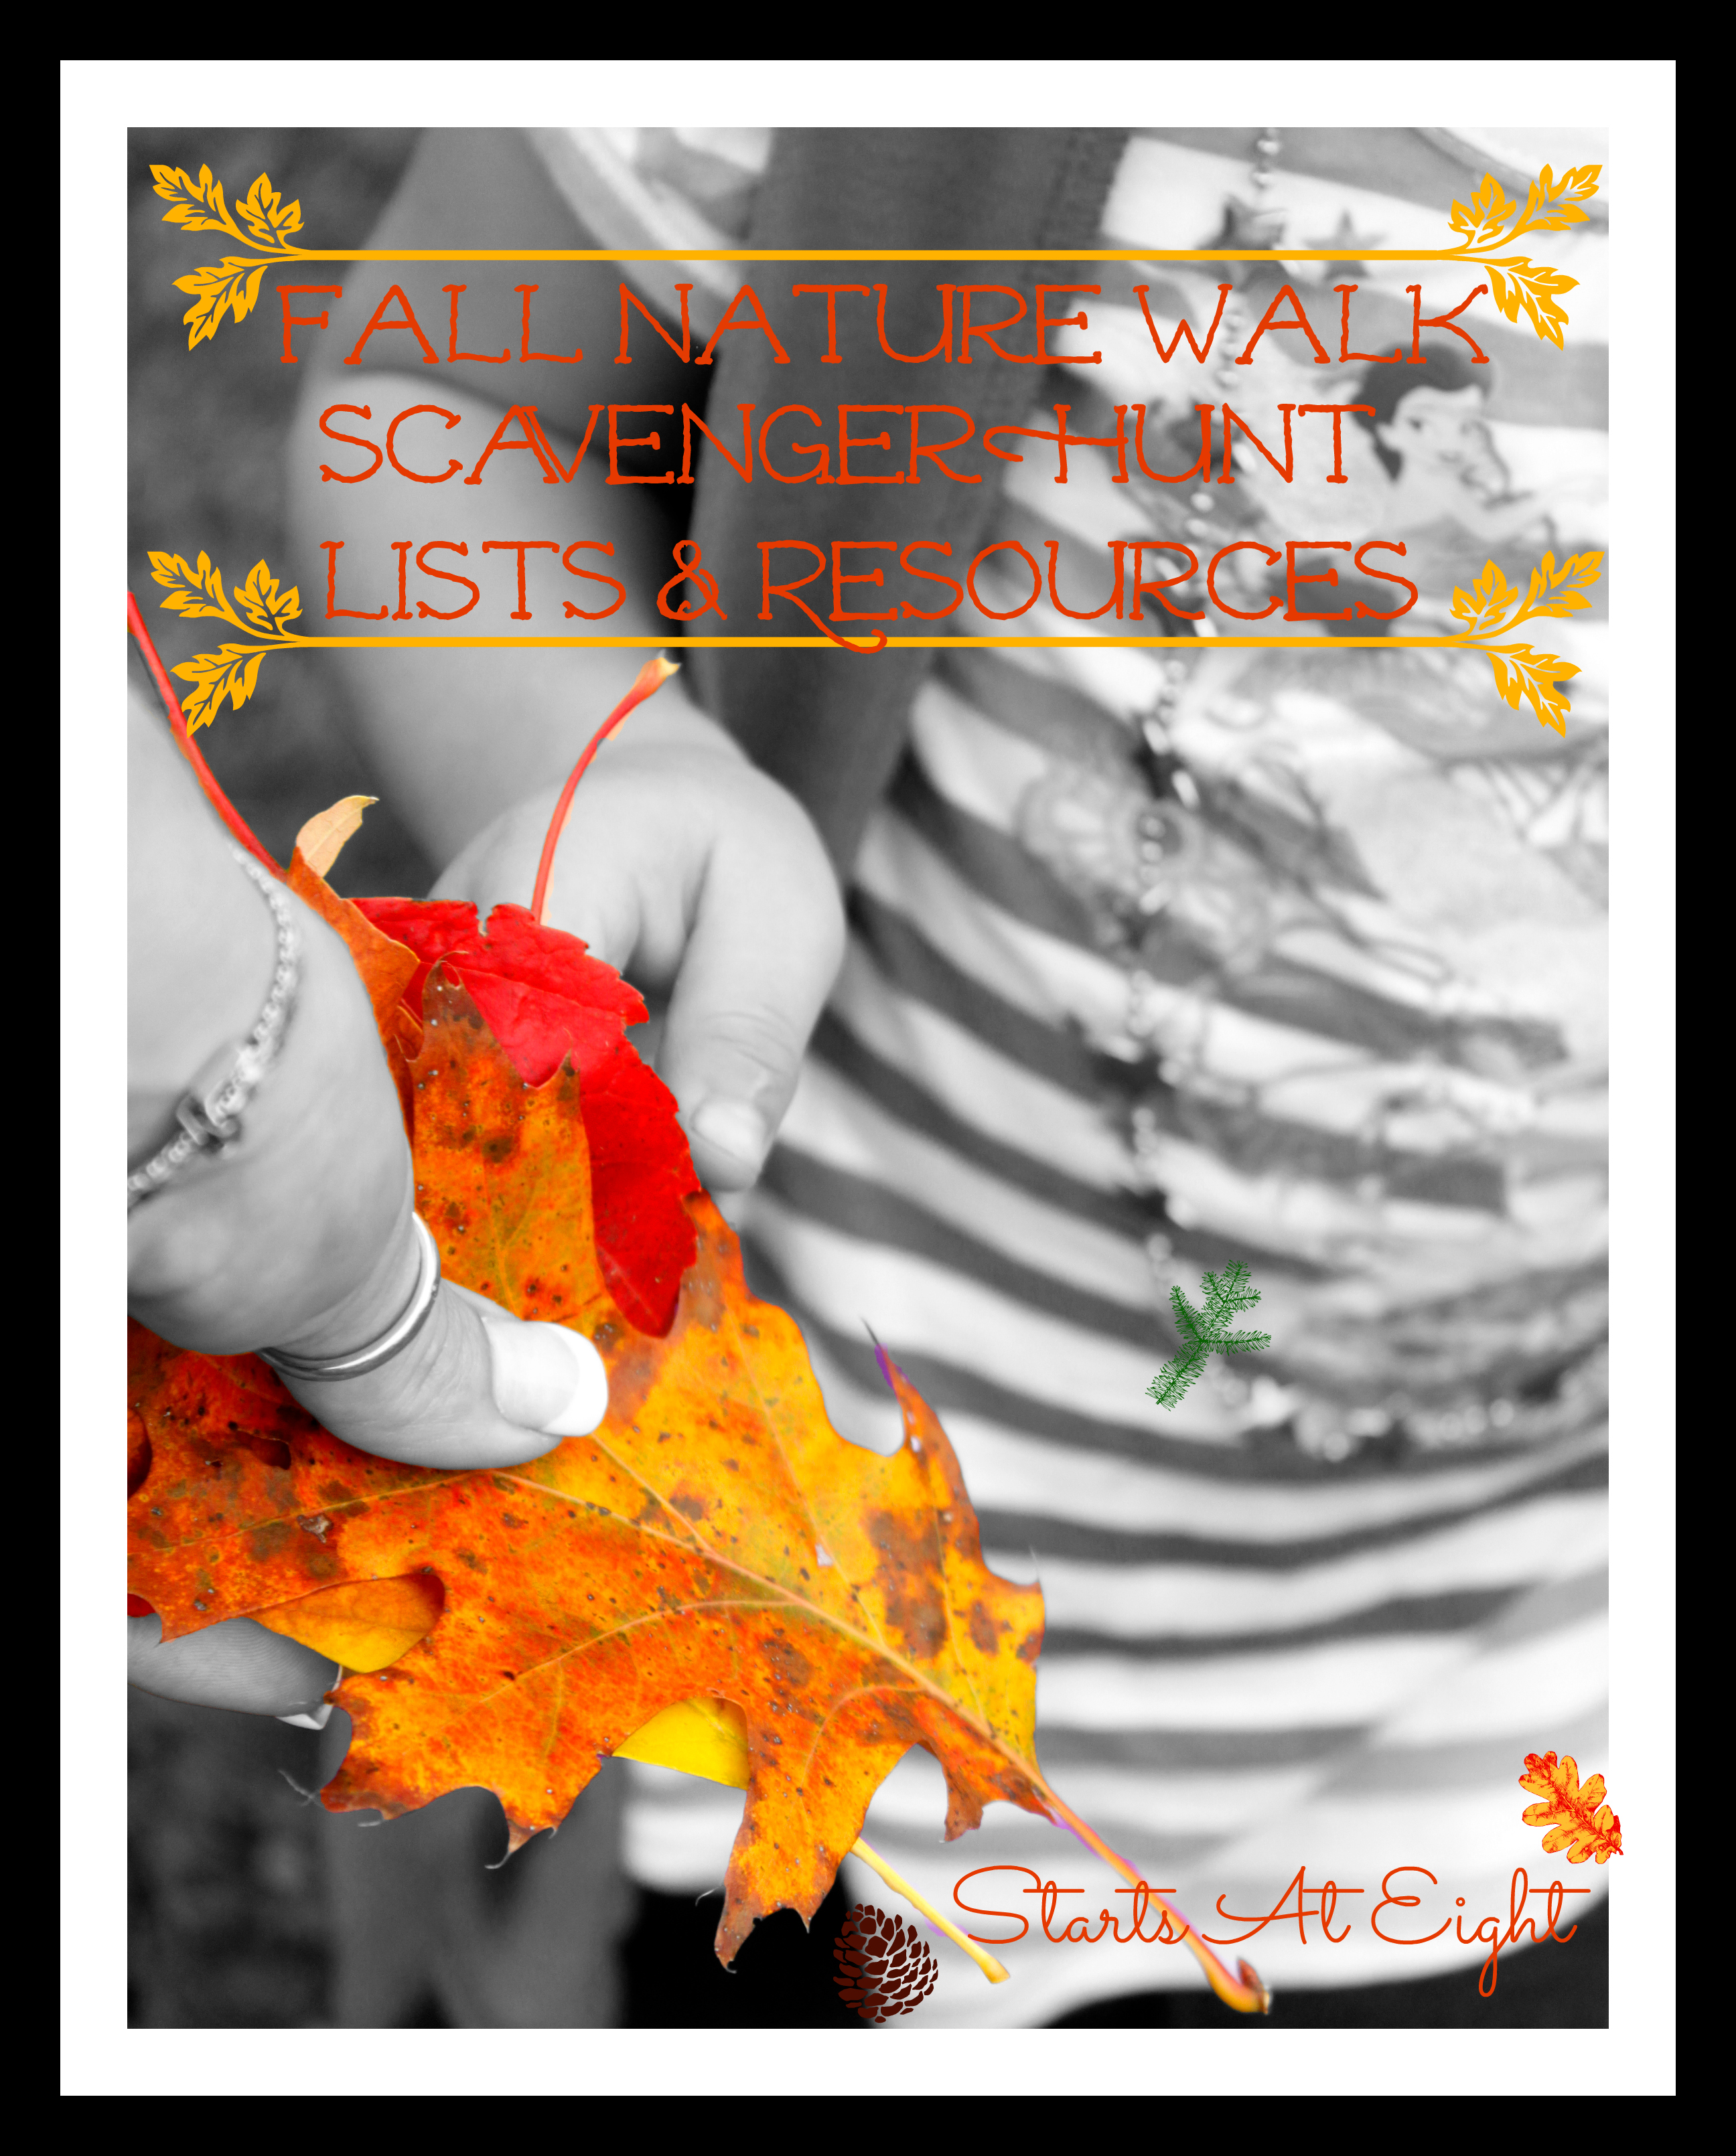 Fall Nature Walk ~ Scavenger Hunt Lists & Resources from Starts At Eight